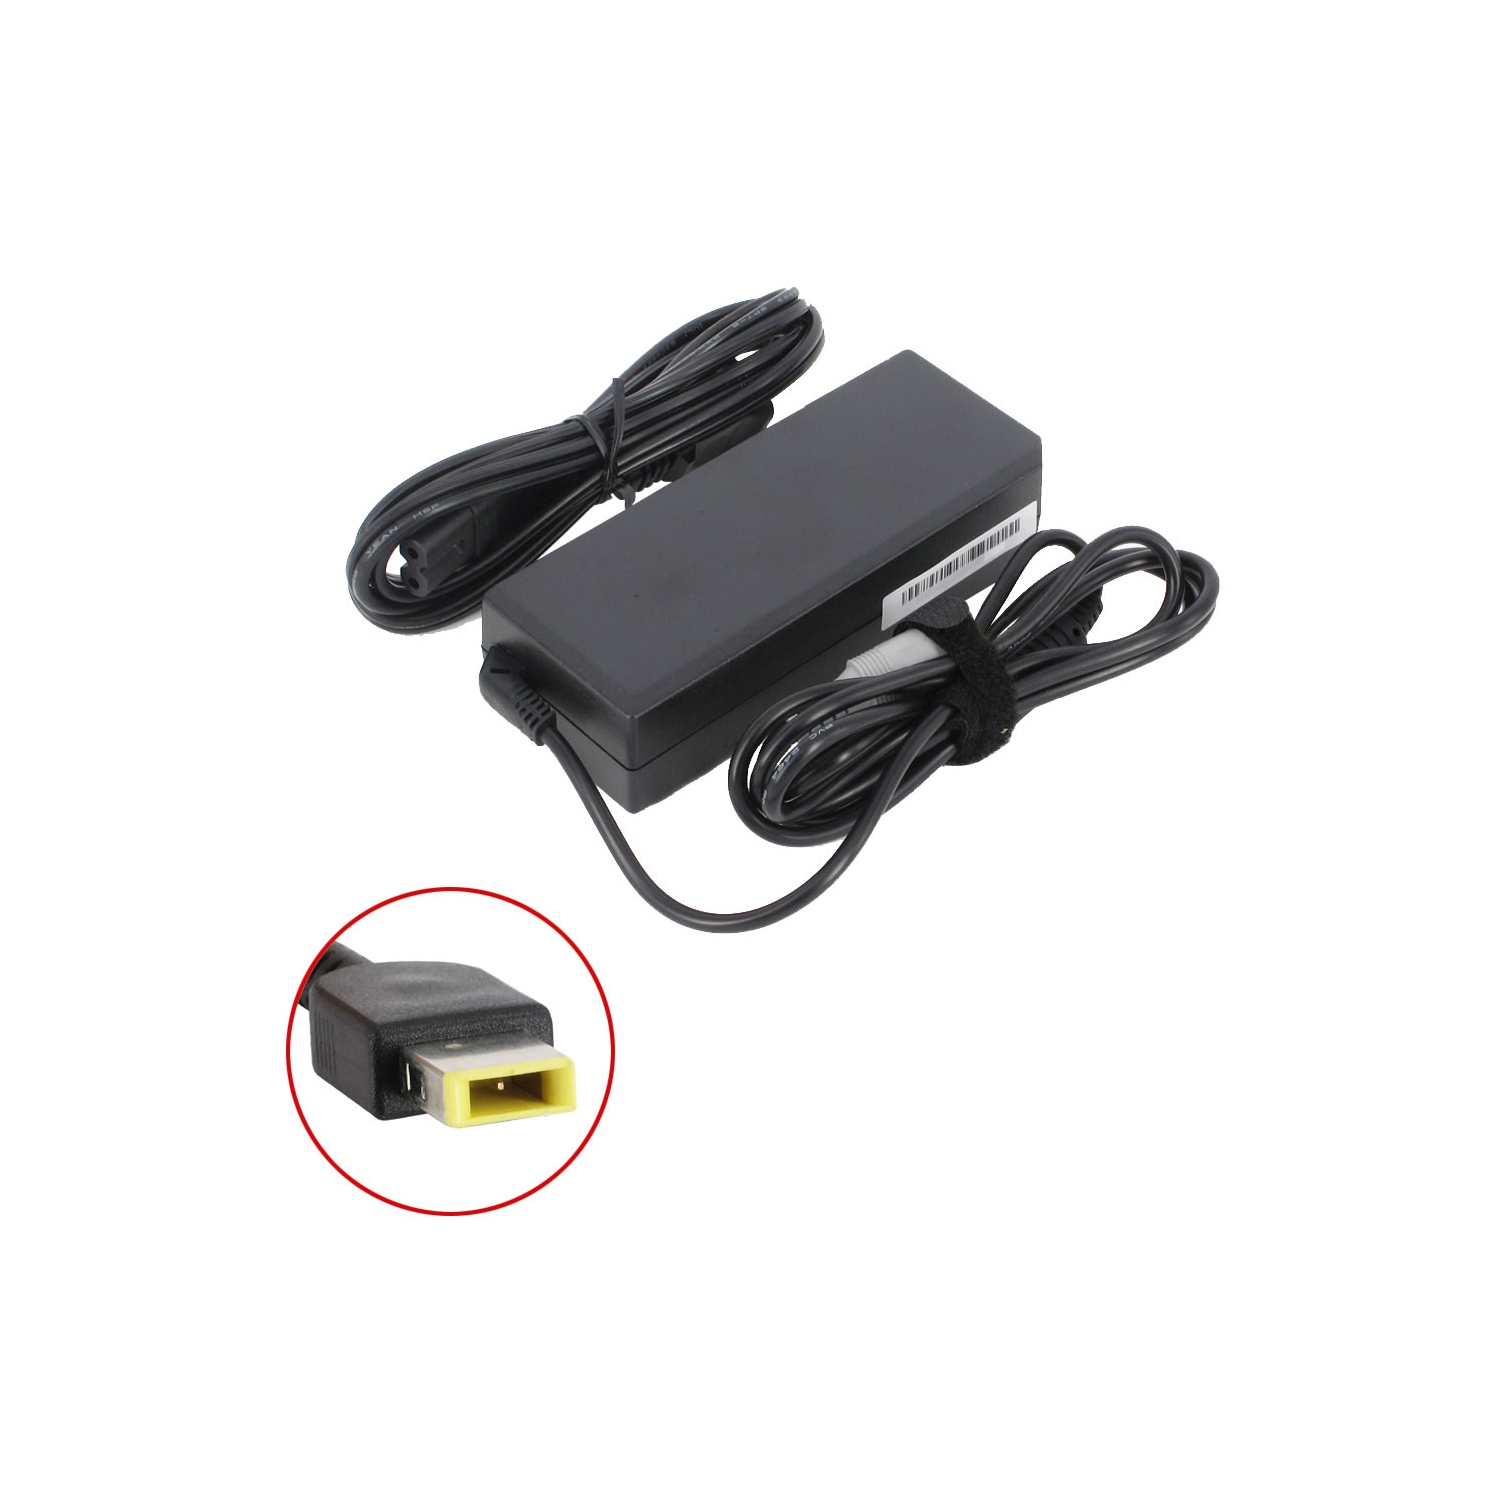 Brand New Laptop AC Adapter for Lenovo IdeaPad 300-17ISK, 0B47455, 45N0247, ADLX45NDC3A, ADLX65NLC3A, 36200235